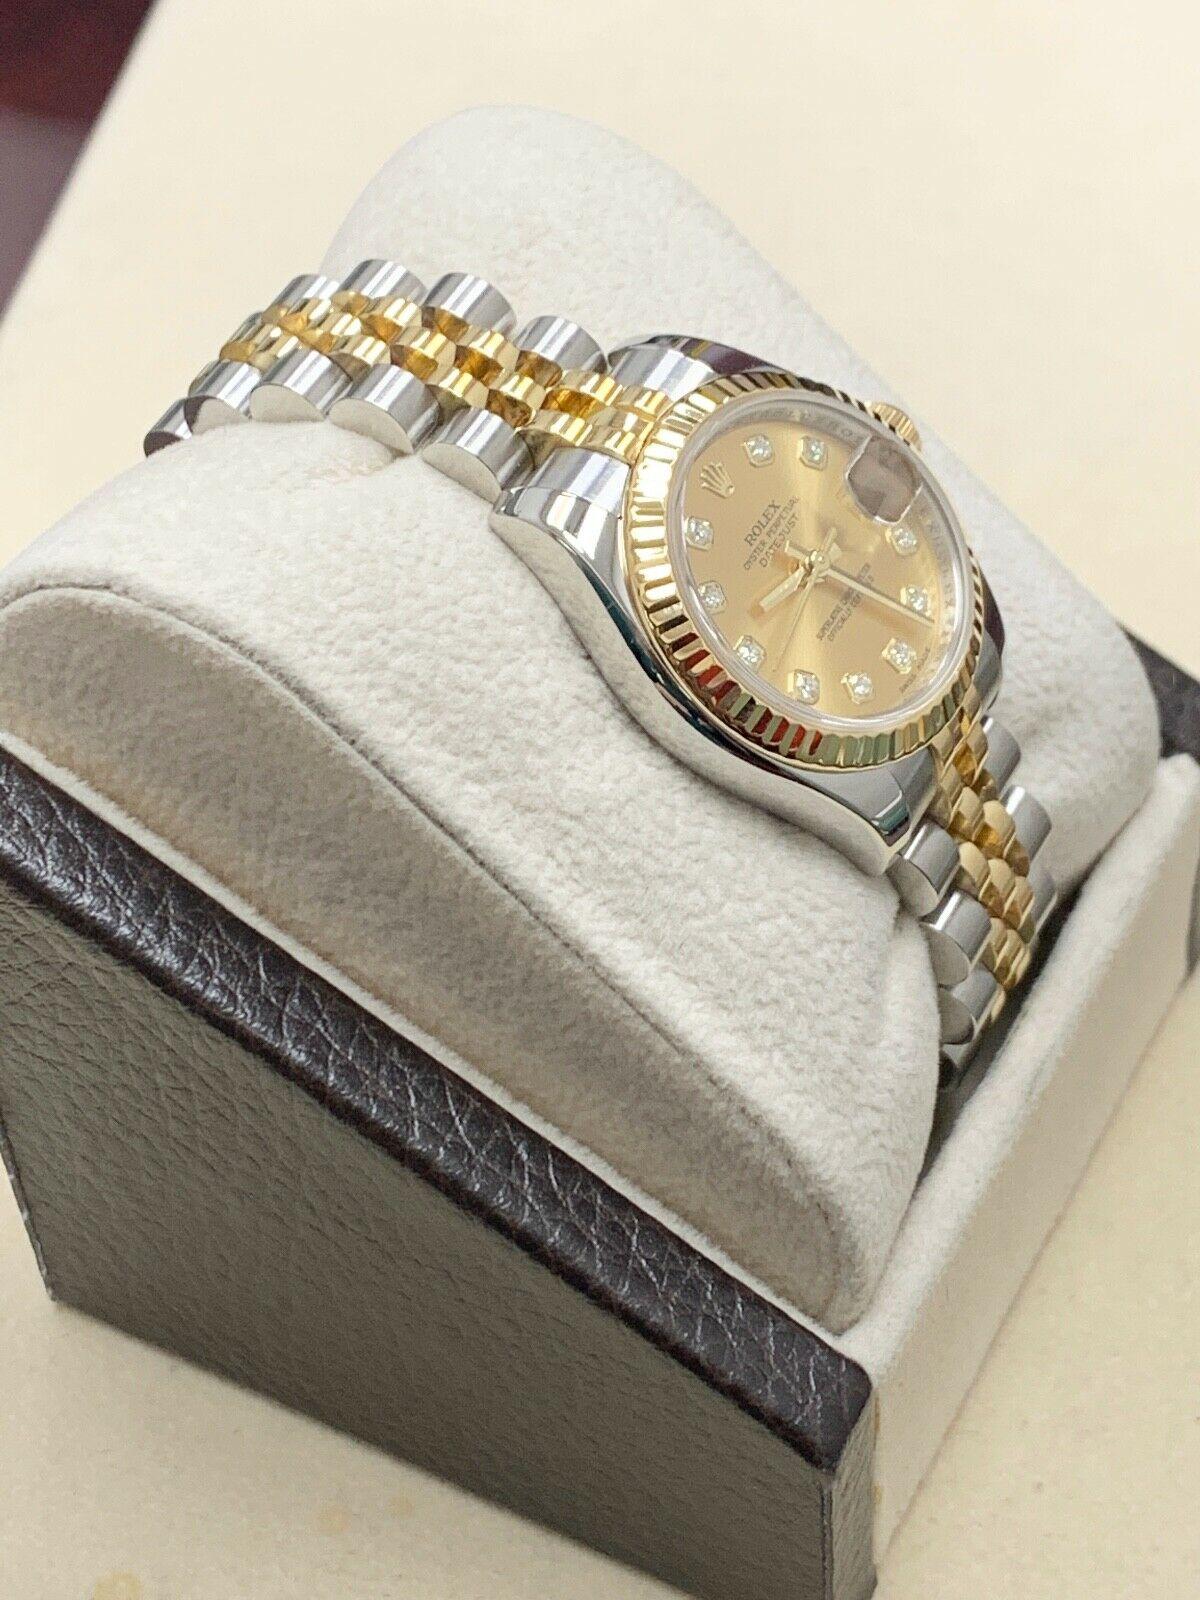 Style Number: 179173

Serial: Z555***

Year: 2007

Model: Datejust

Case Material: Stainless Steel

Band: 18K Yellow Gold & Stainless Steel

Bezel:  18K Yellow Gold 

Dial: Original Factory Champagne Diamond Dial 

Face: Sapphire Crystal 
 
Case